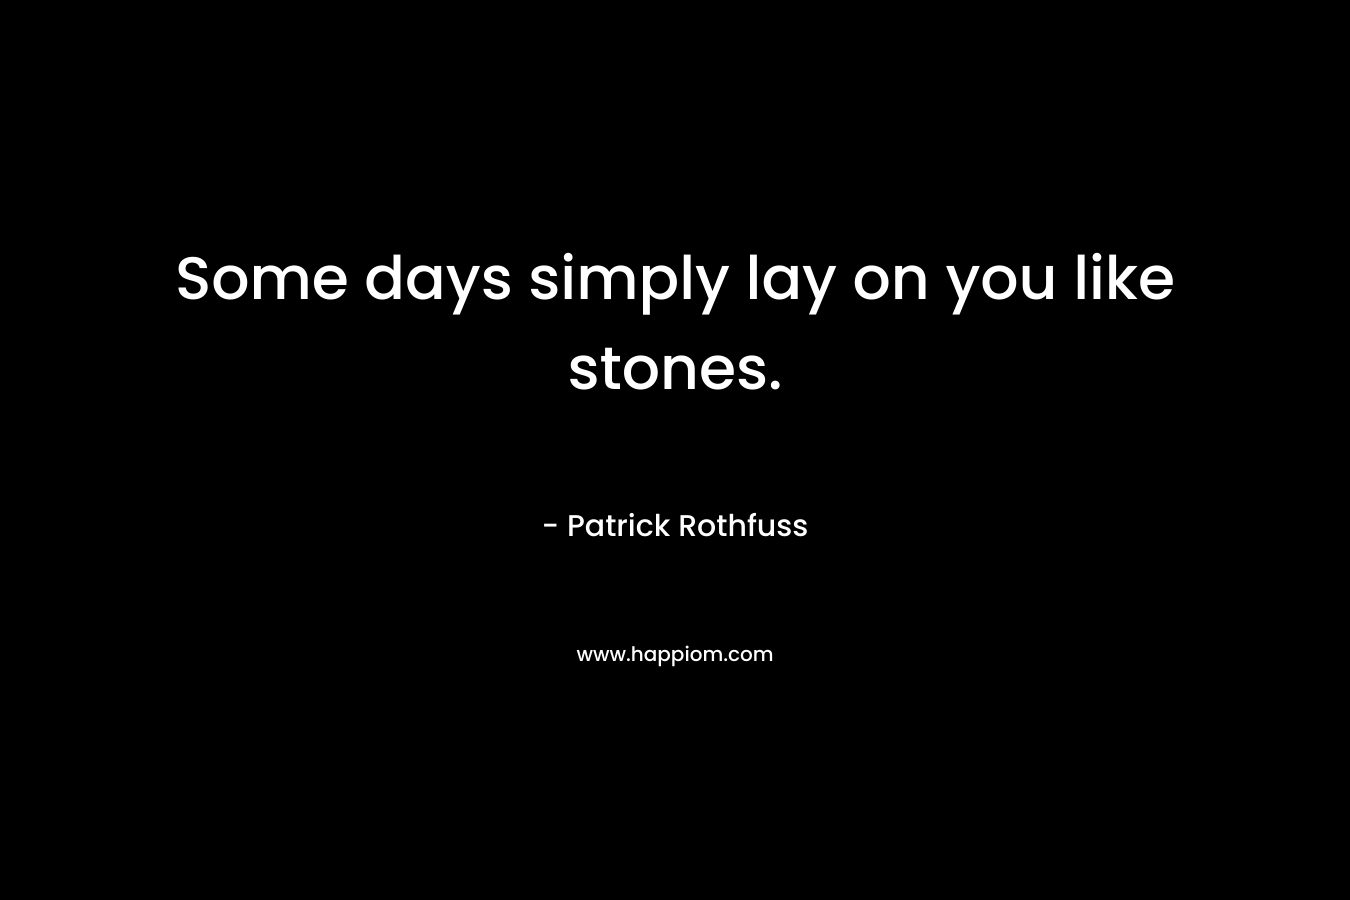 Some days simply lay on you like stones.